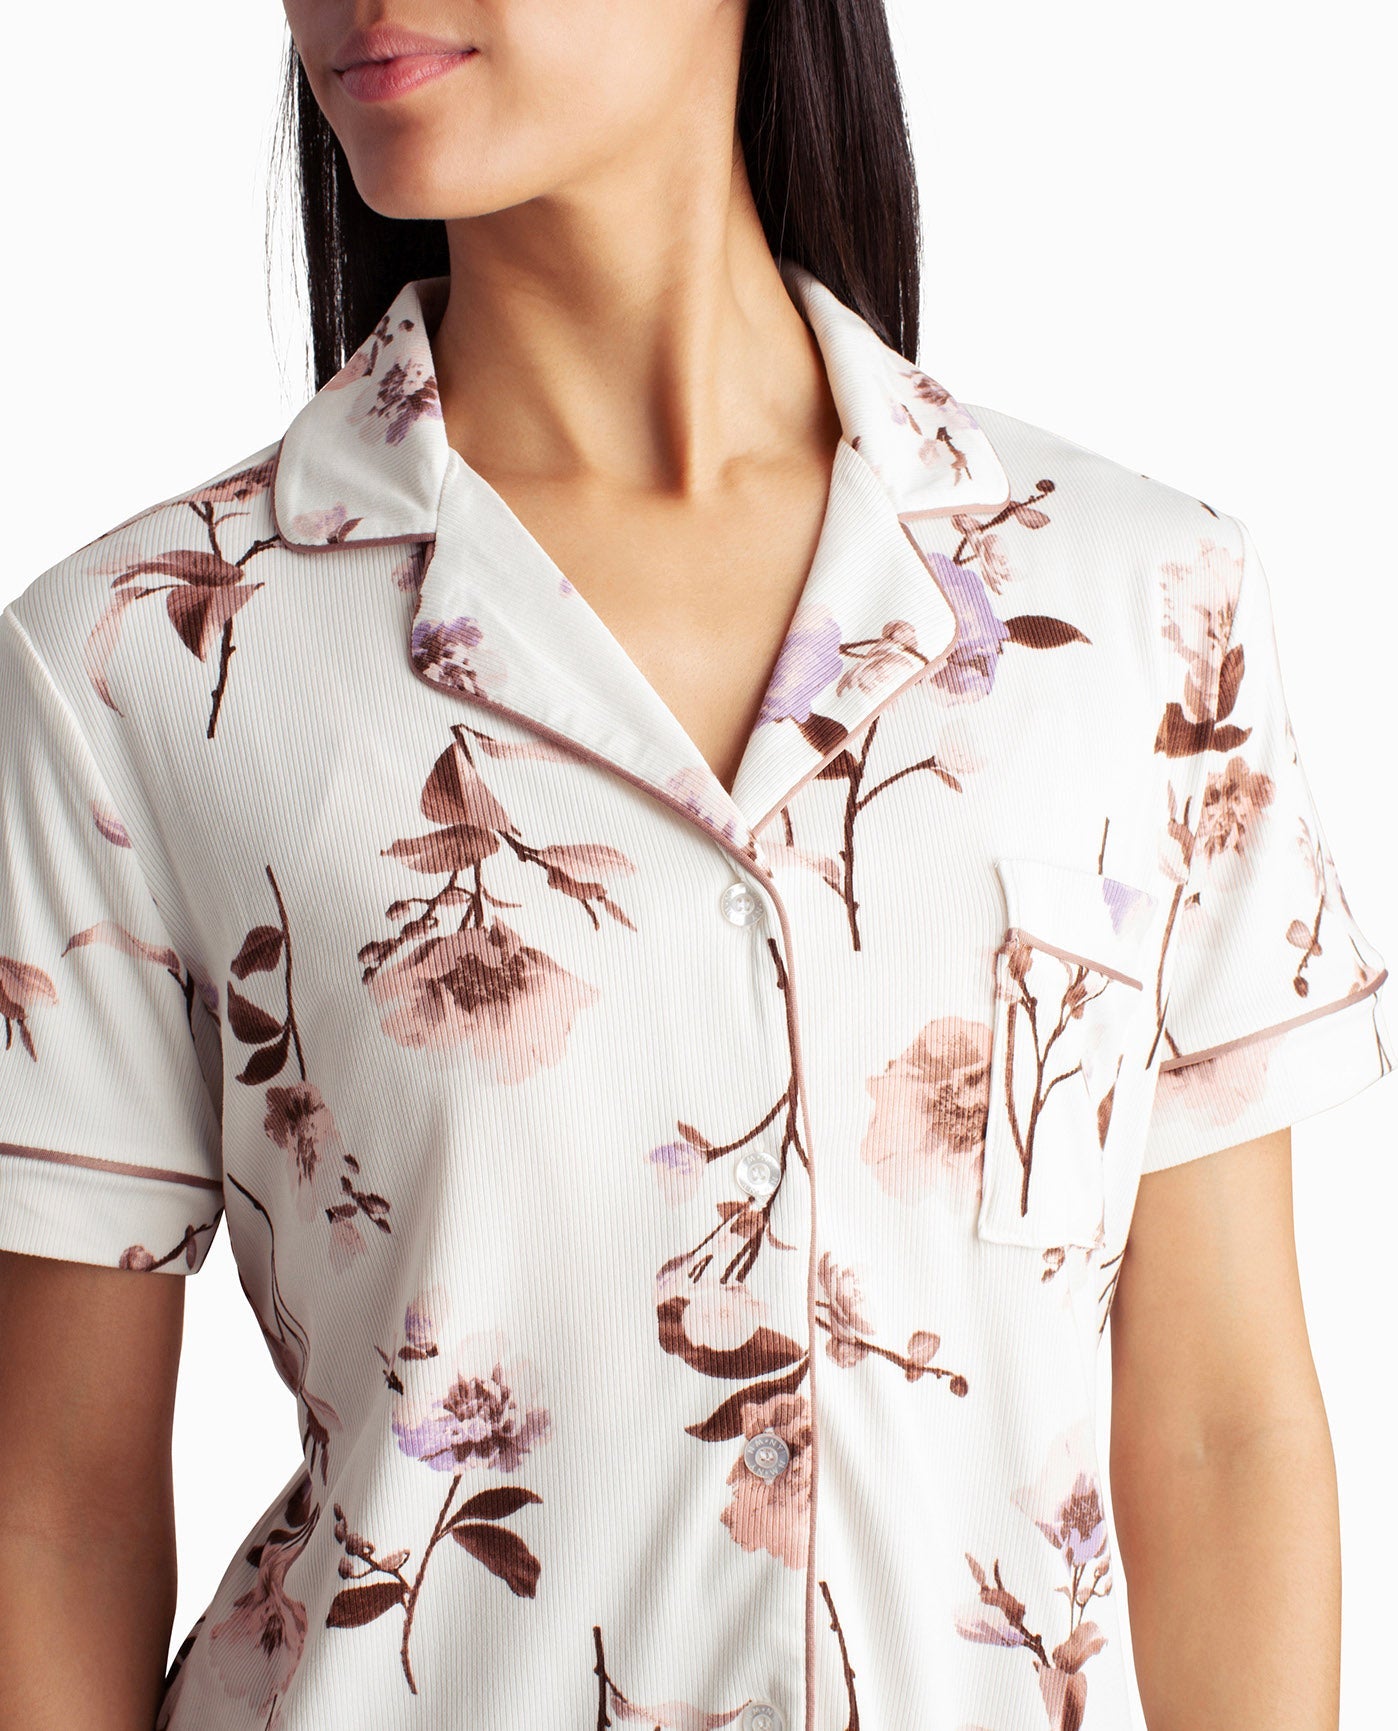 NECKLINE OF RIBBED SHIRT AND PANT TWO-PIECE SLEEPWEAR SET | Peony Floral